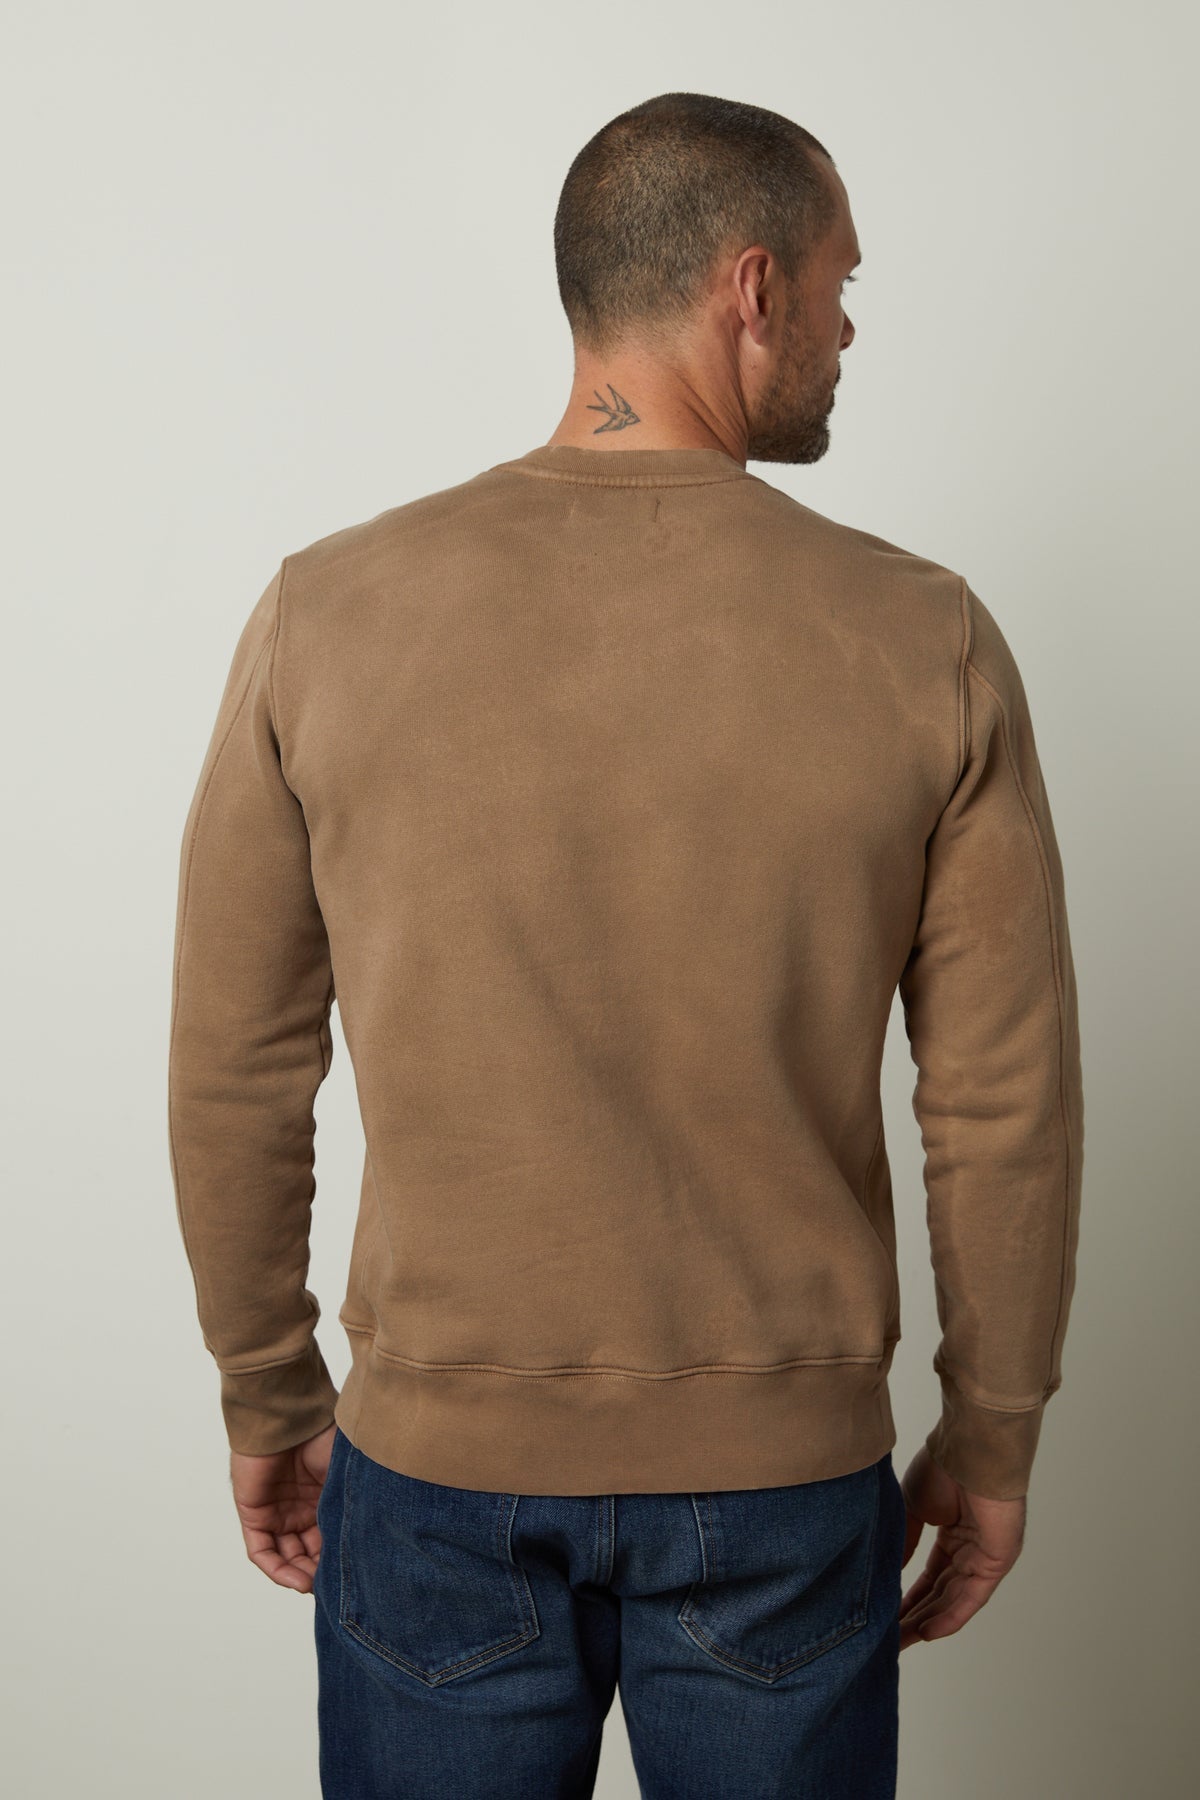 The back view of a man wearing a Velvet by Graham & Spencer MATTS CREW NECK SWEATSHIRT for comfort and warmth.-35782999998657